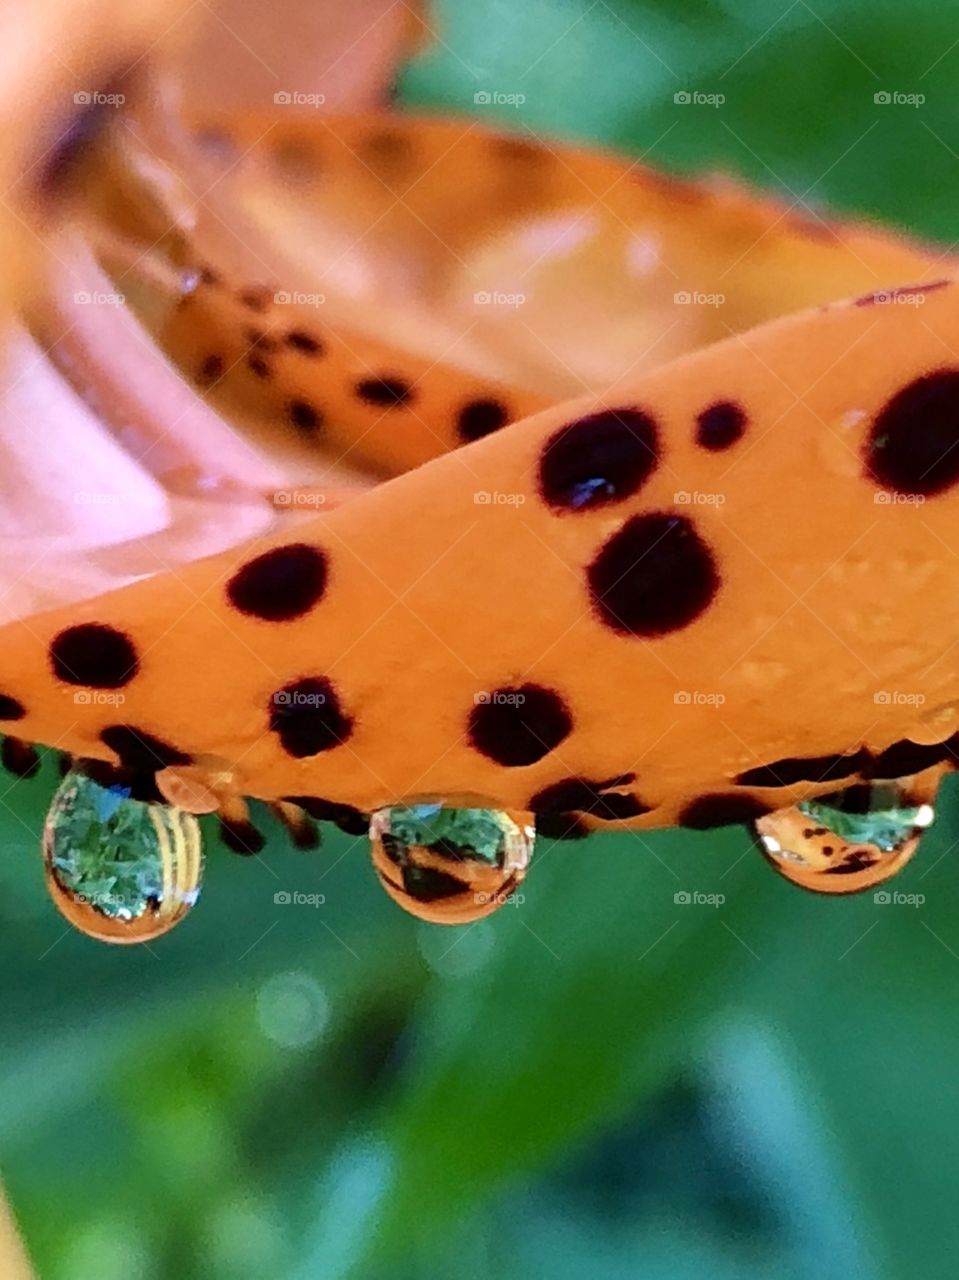 Gardens of tiger lilies are reflected in the raindrops that have collected after a summer rainstorm.